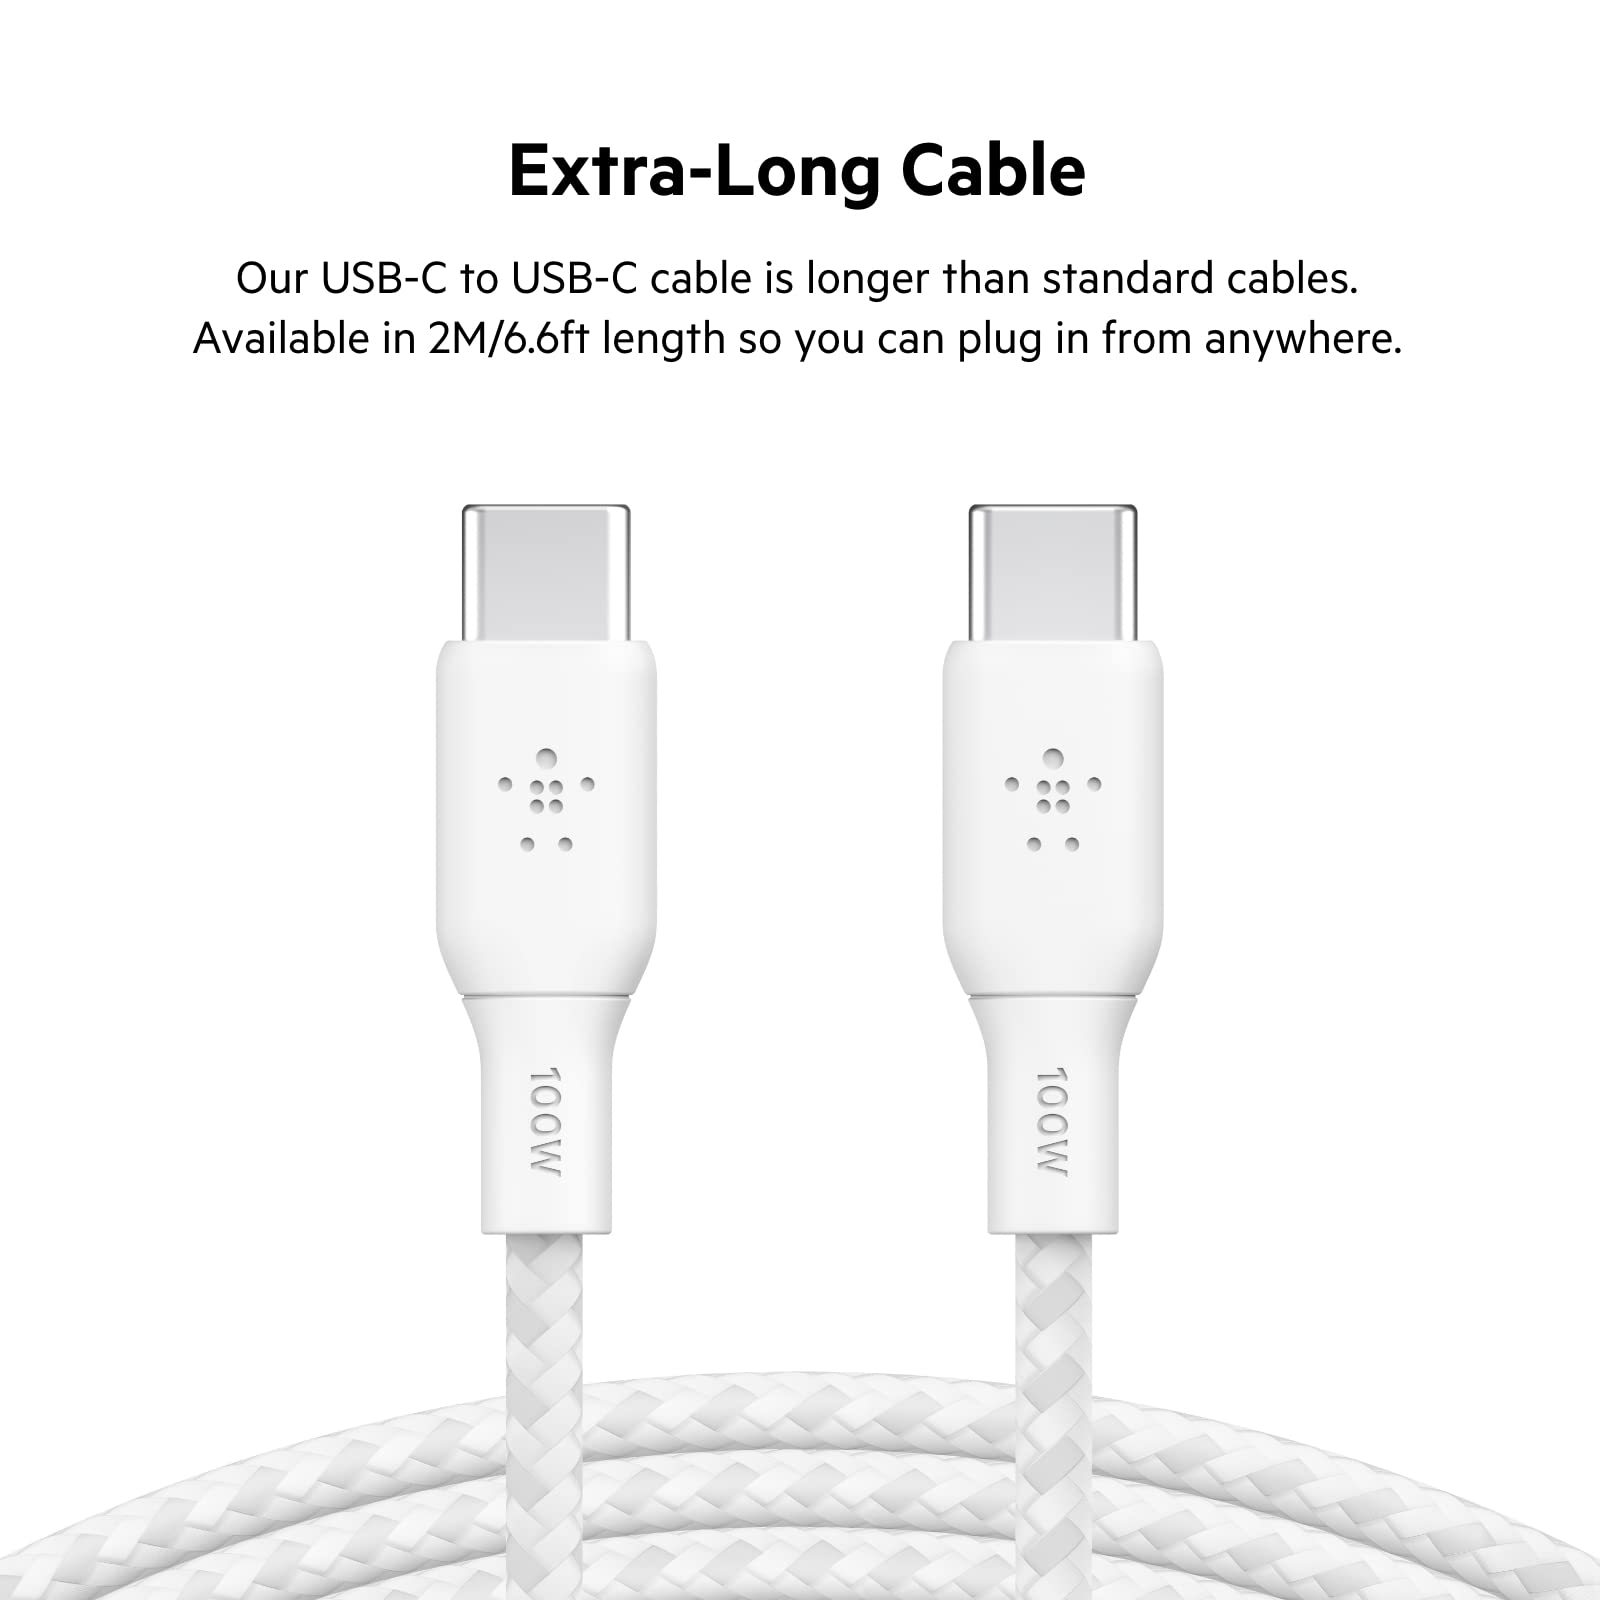 Belkin USB Type C to C Cable, 100W Power Delivery USB-IF Certified 2.0 Cable with Double Braided Nylon Exterior for iPad Pro, MacBook, Galaxy and More, 2M Cable Length, White